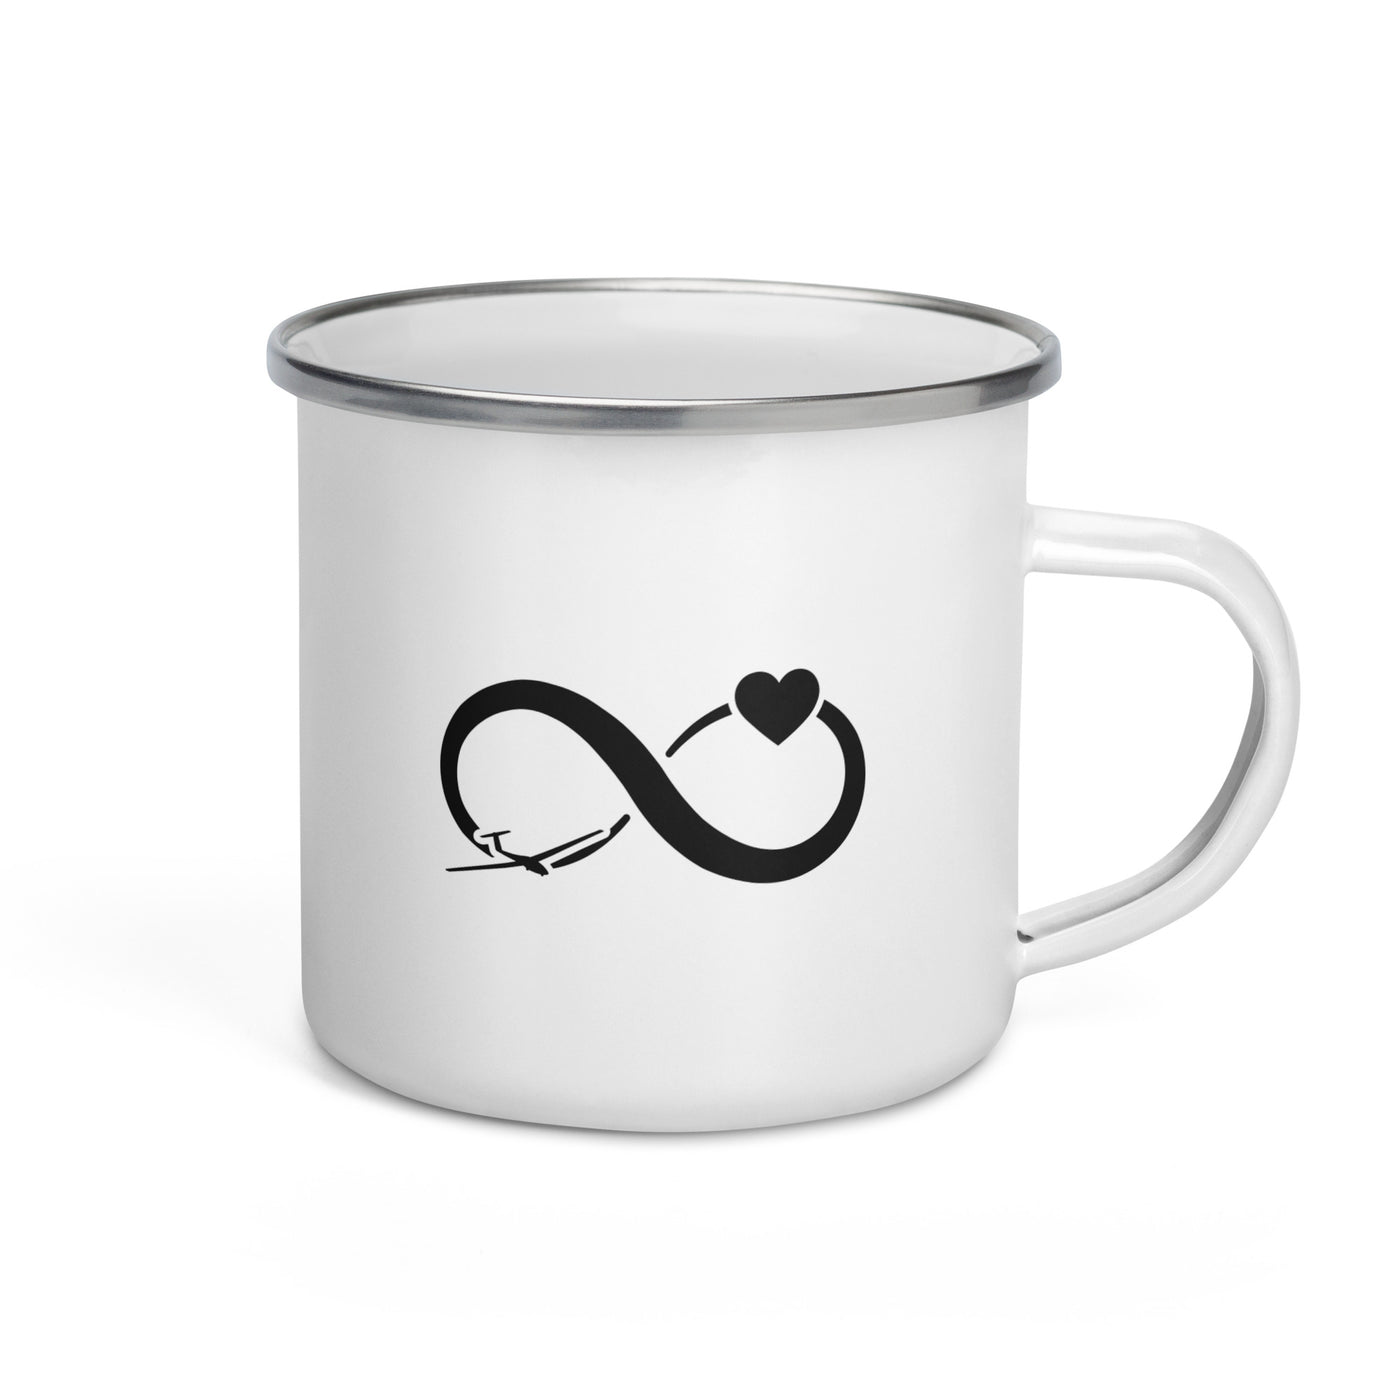 Infinity Heart And Sailplane - Emaille Tasse berge Default Title